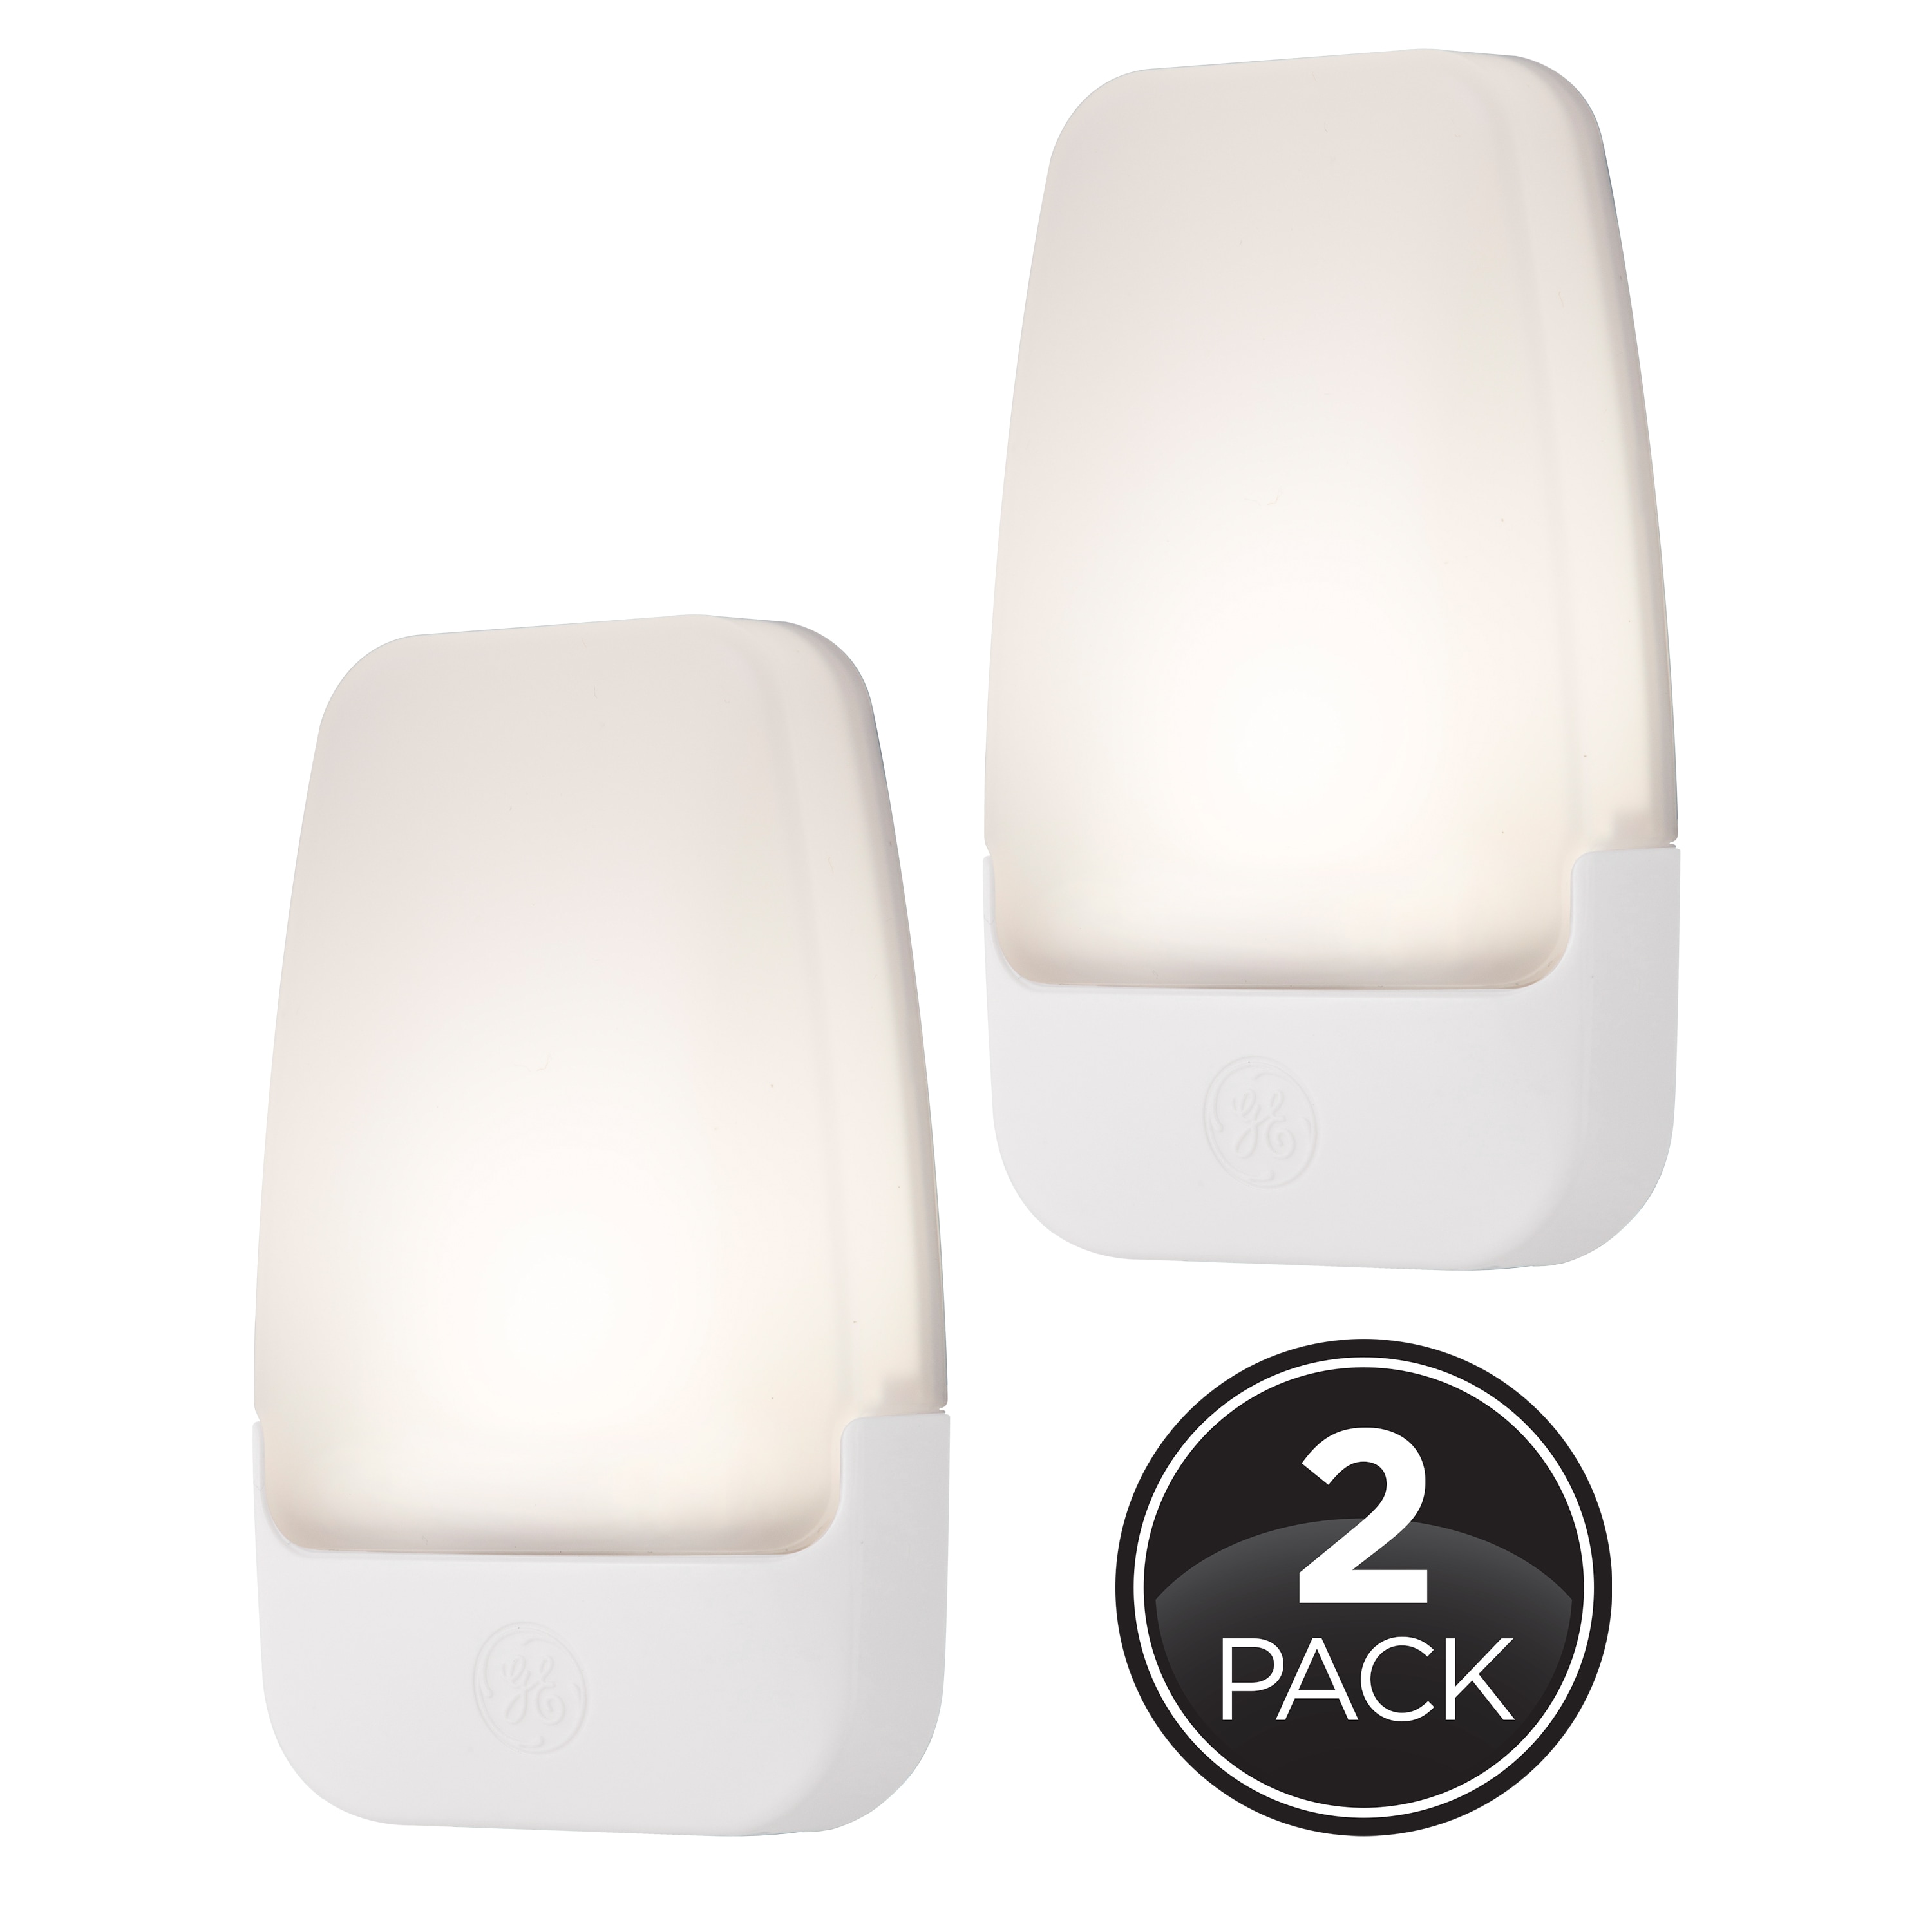 Plug-in GE Home Décor Dusk-to-Dawn Color-Changing LED Night Light 2 Pack 